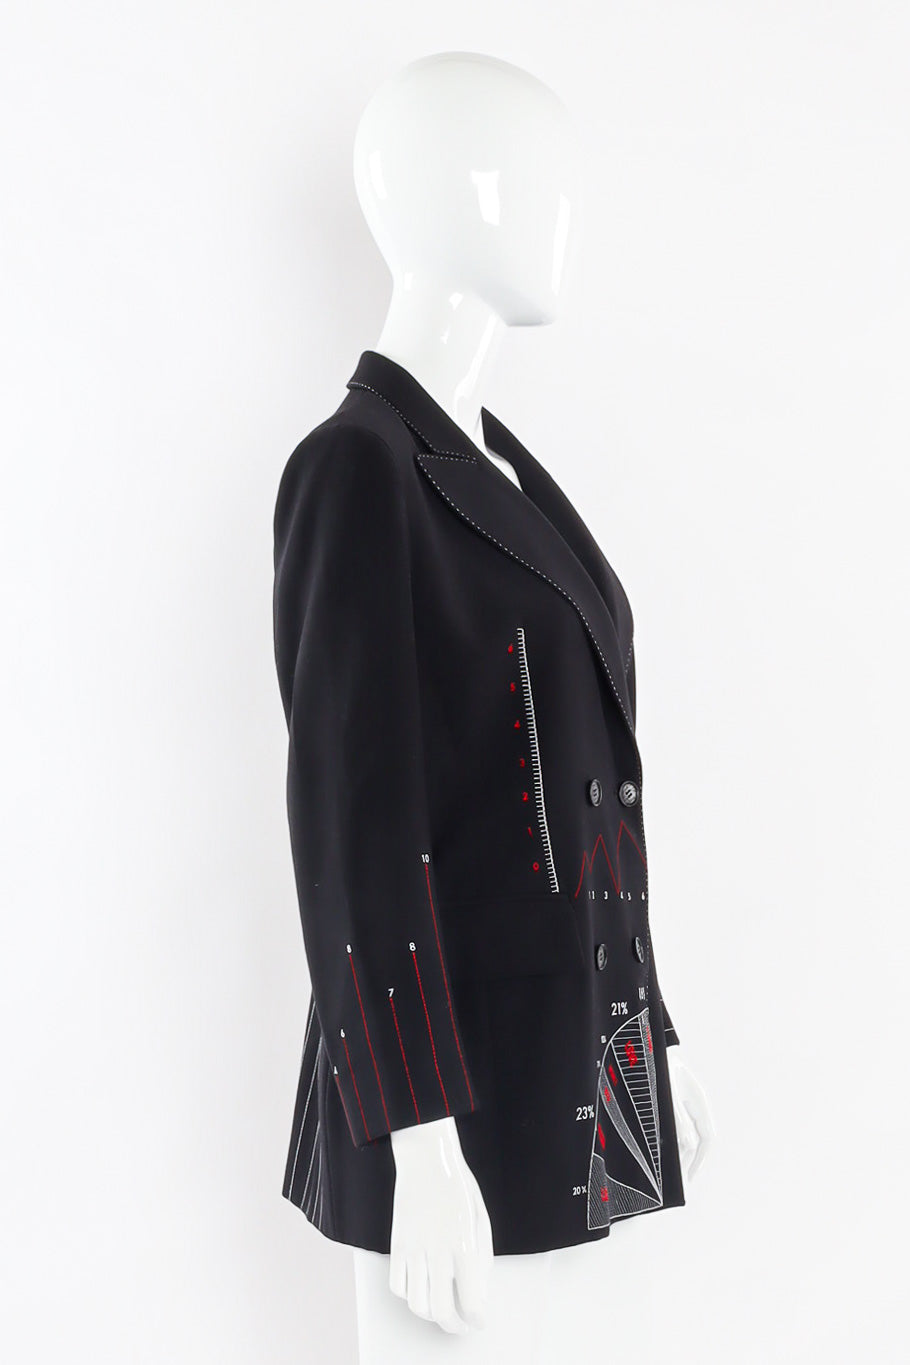 Embroidered graph blazer by Moschino side view mannequin  @recessla